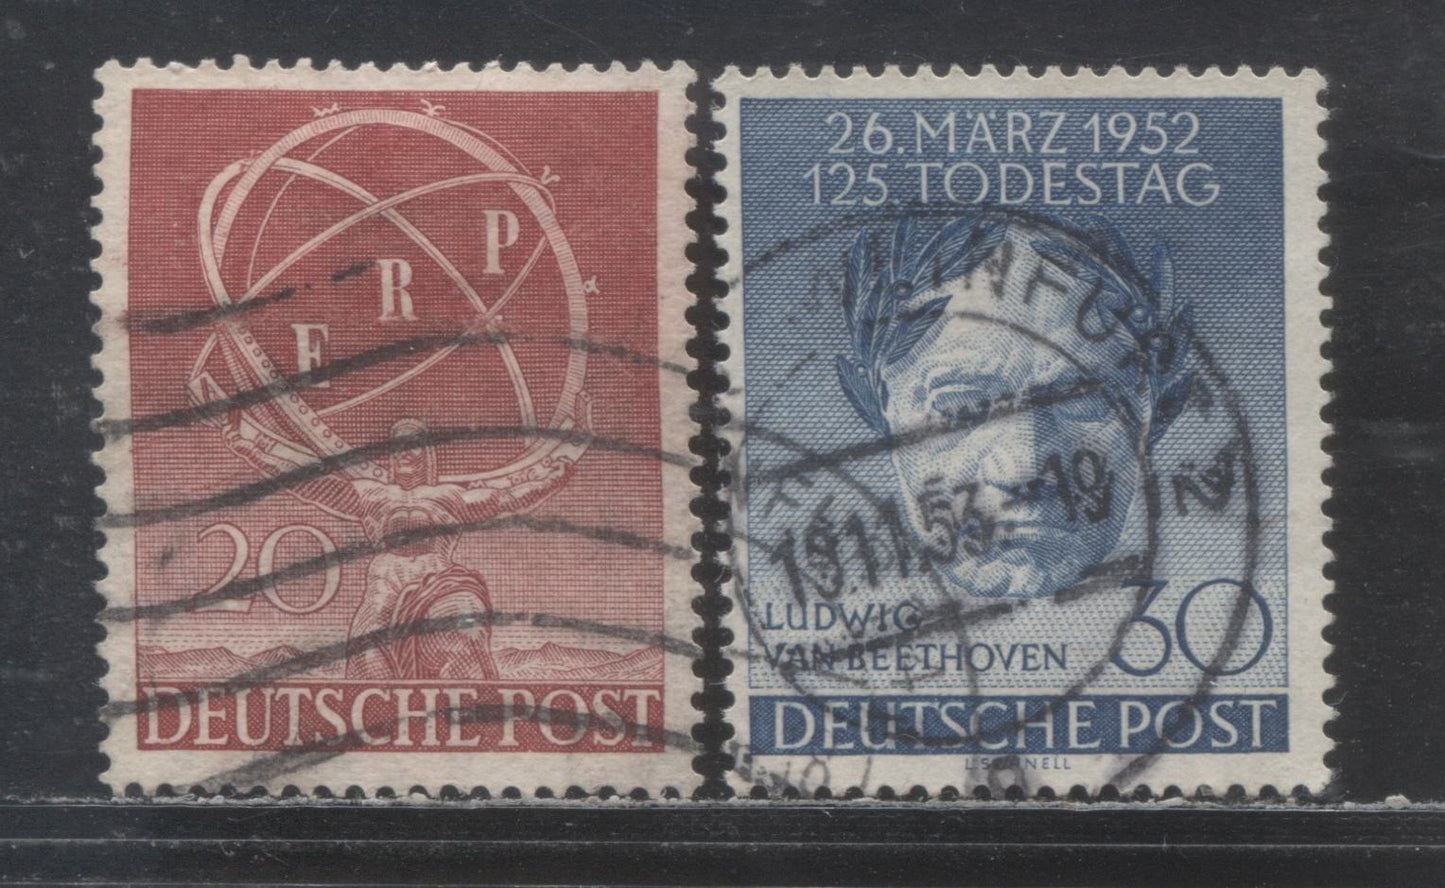 Lot 40 Germany - Berlin SC#9N68/9N80 1950-1952 European Recovery Plan - Beethoven Issues, 2 Fine Used Singles, Click on Listing to See ALL Pictures, Estimated Value $26